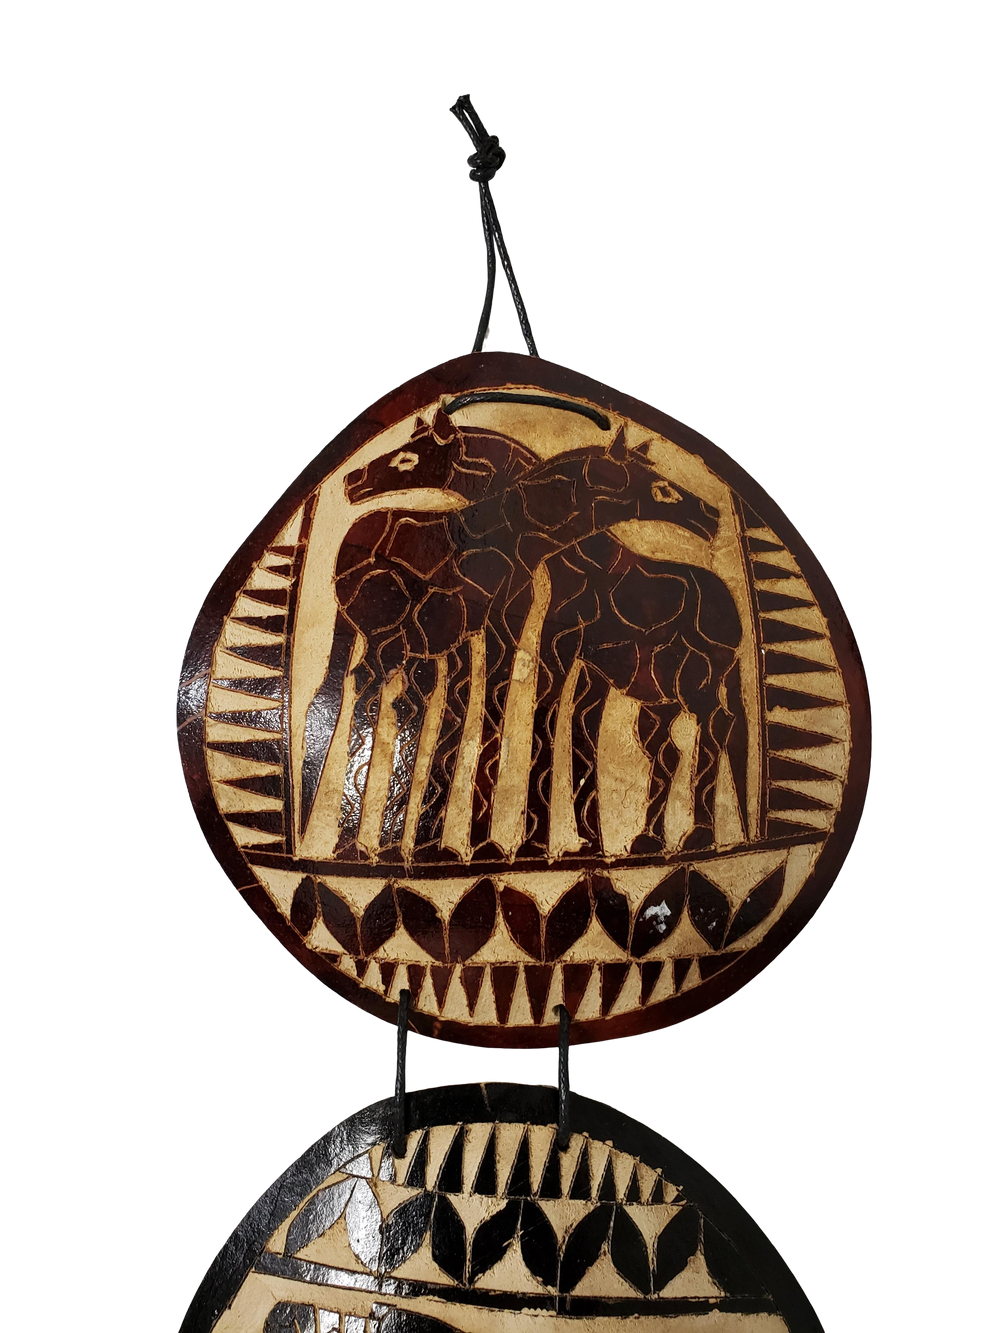 Authentic African Serengeti Gourd Slice Wall Hanging by Boutique Africa (Giraffe)